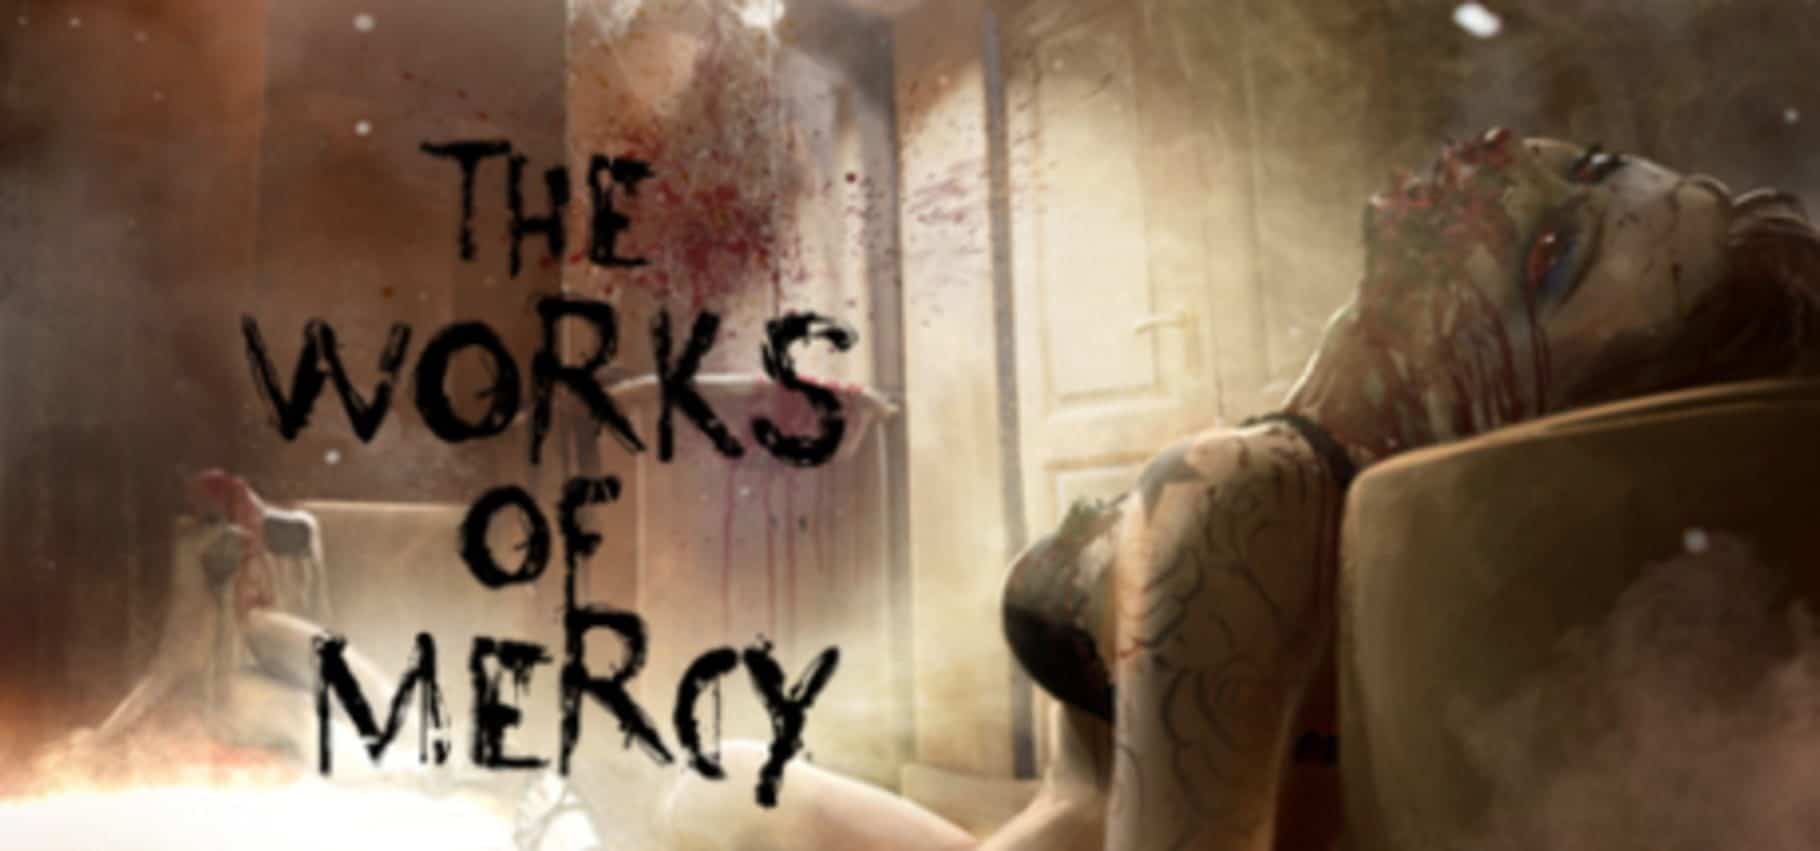 The Works of Mercy